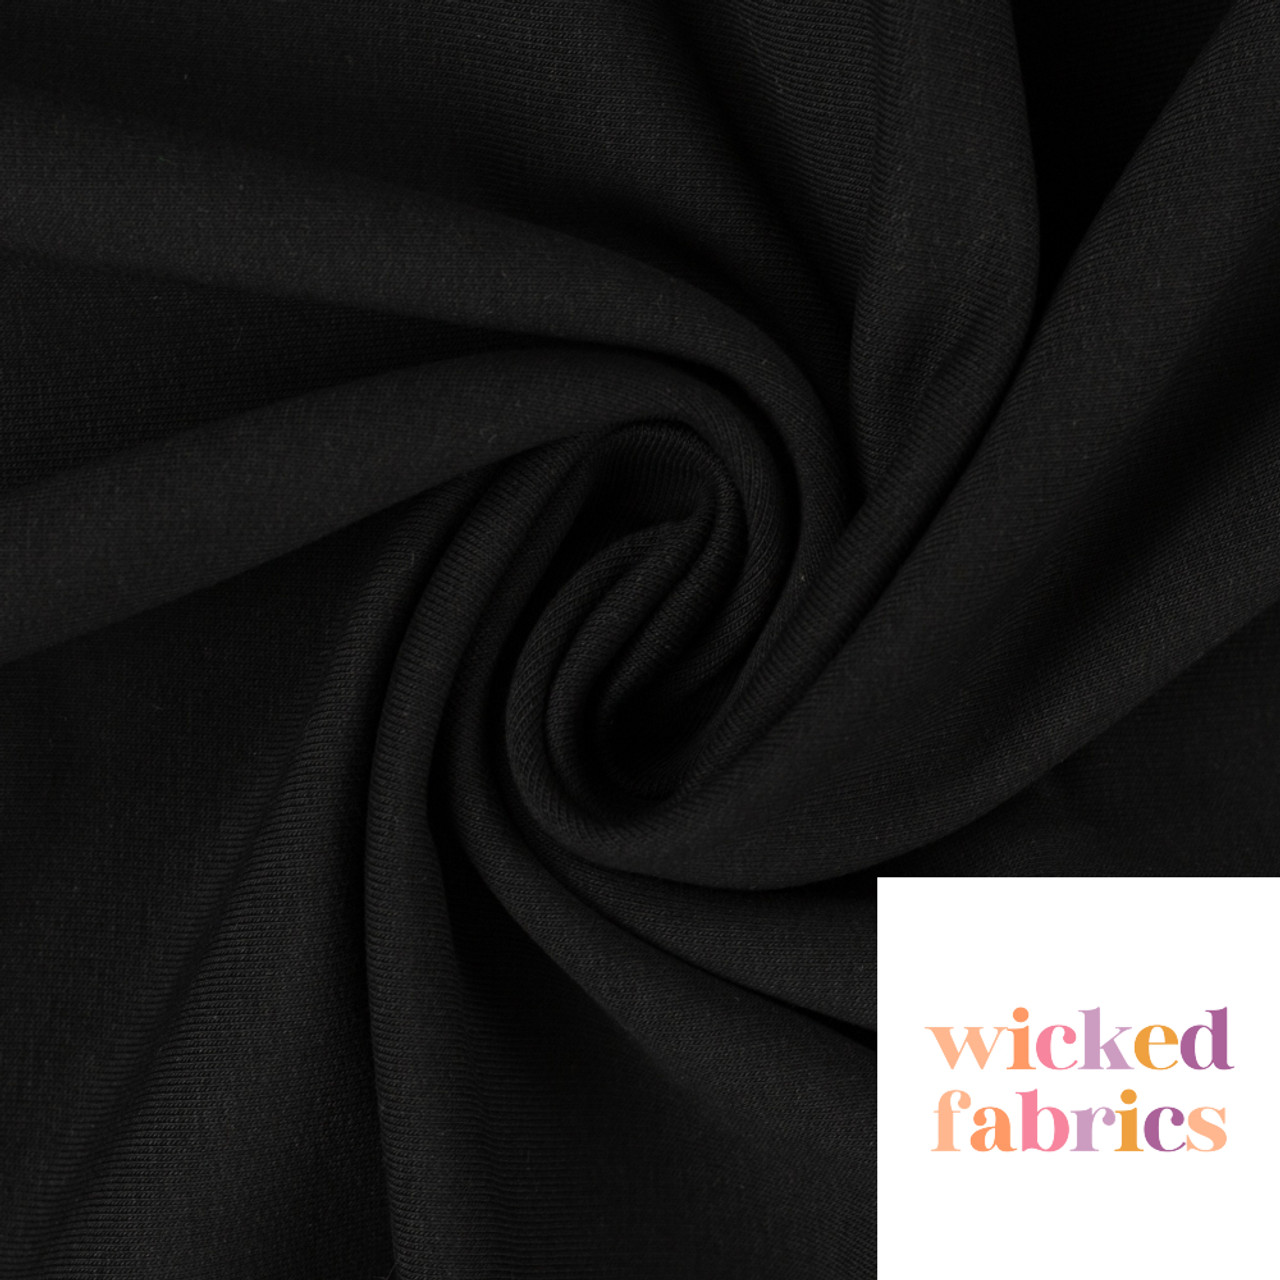 https://cdn11.bigcommerce.com/s-4co0ad/images/stencil/1280x1280/products/364/12798/Cotton_Elastane_Jersey_in_Black_-_Wicked_Fabrics__91004.1675921613.jpg?c=2